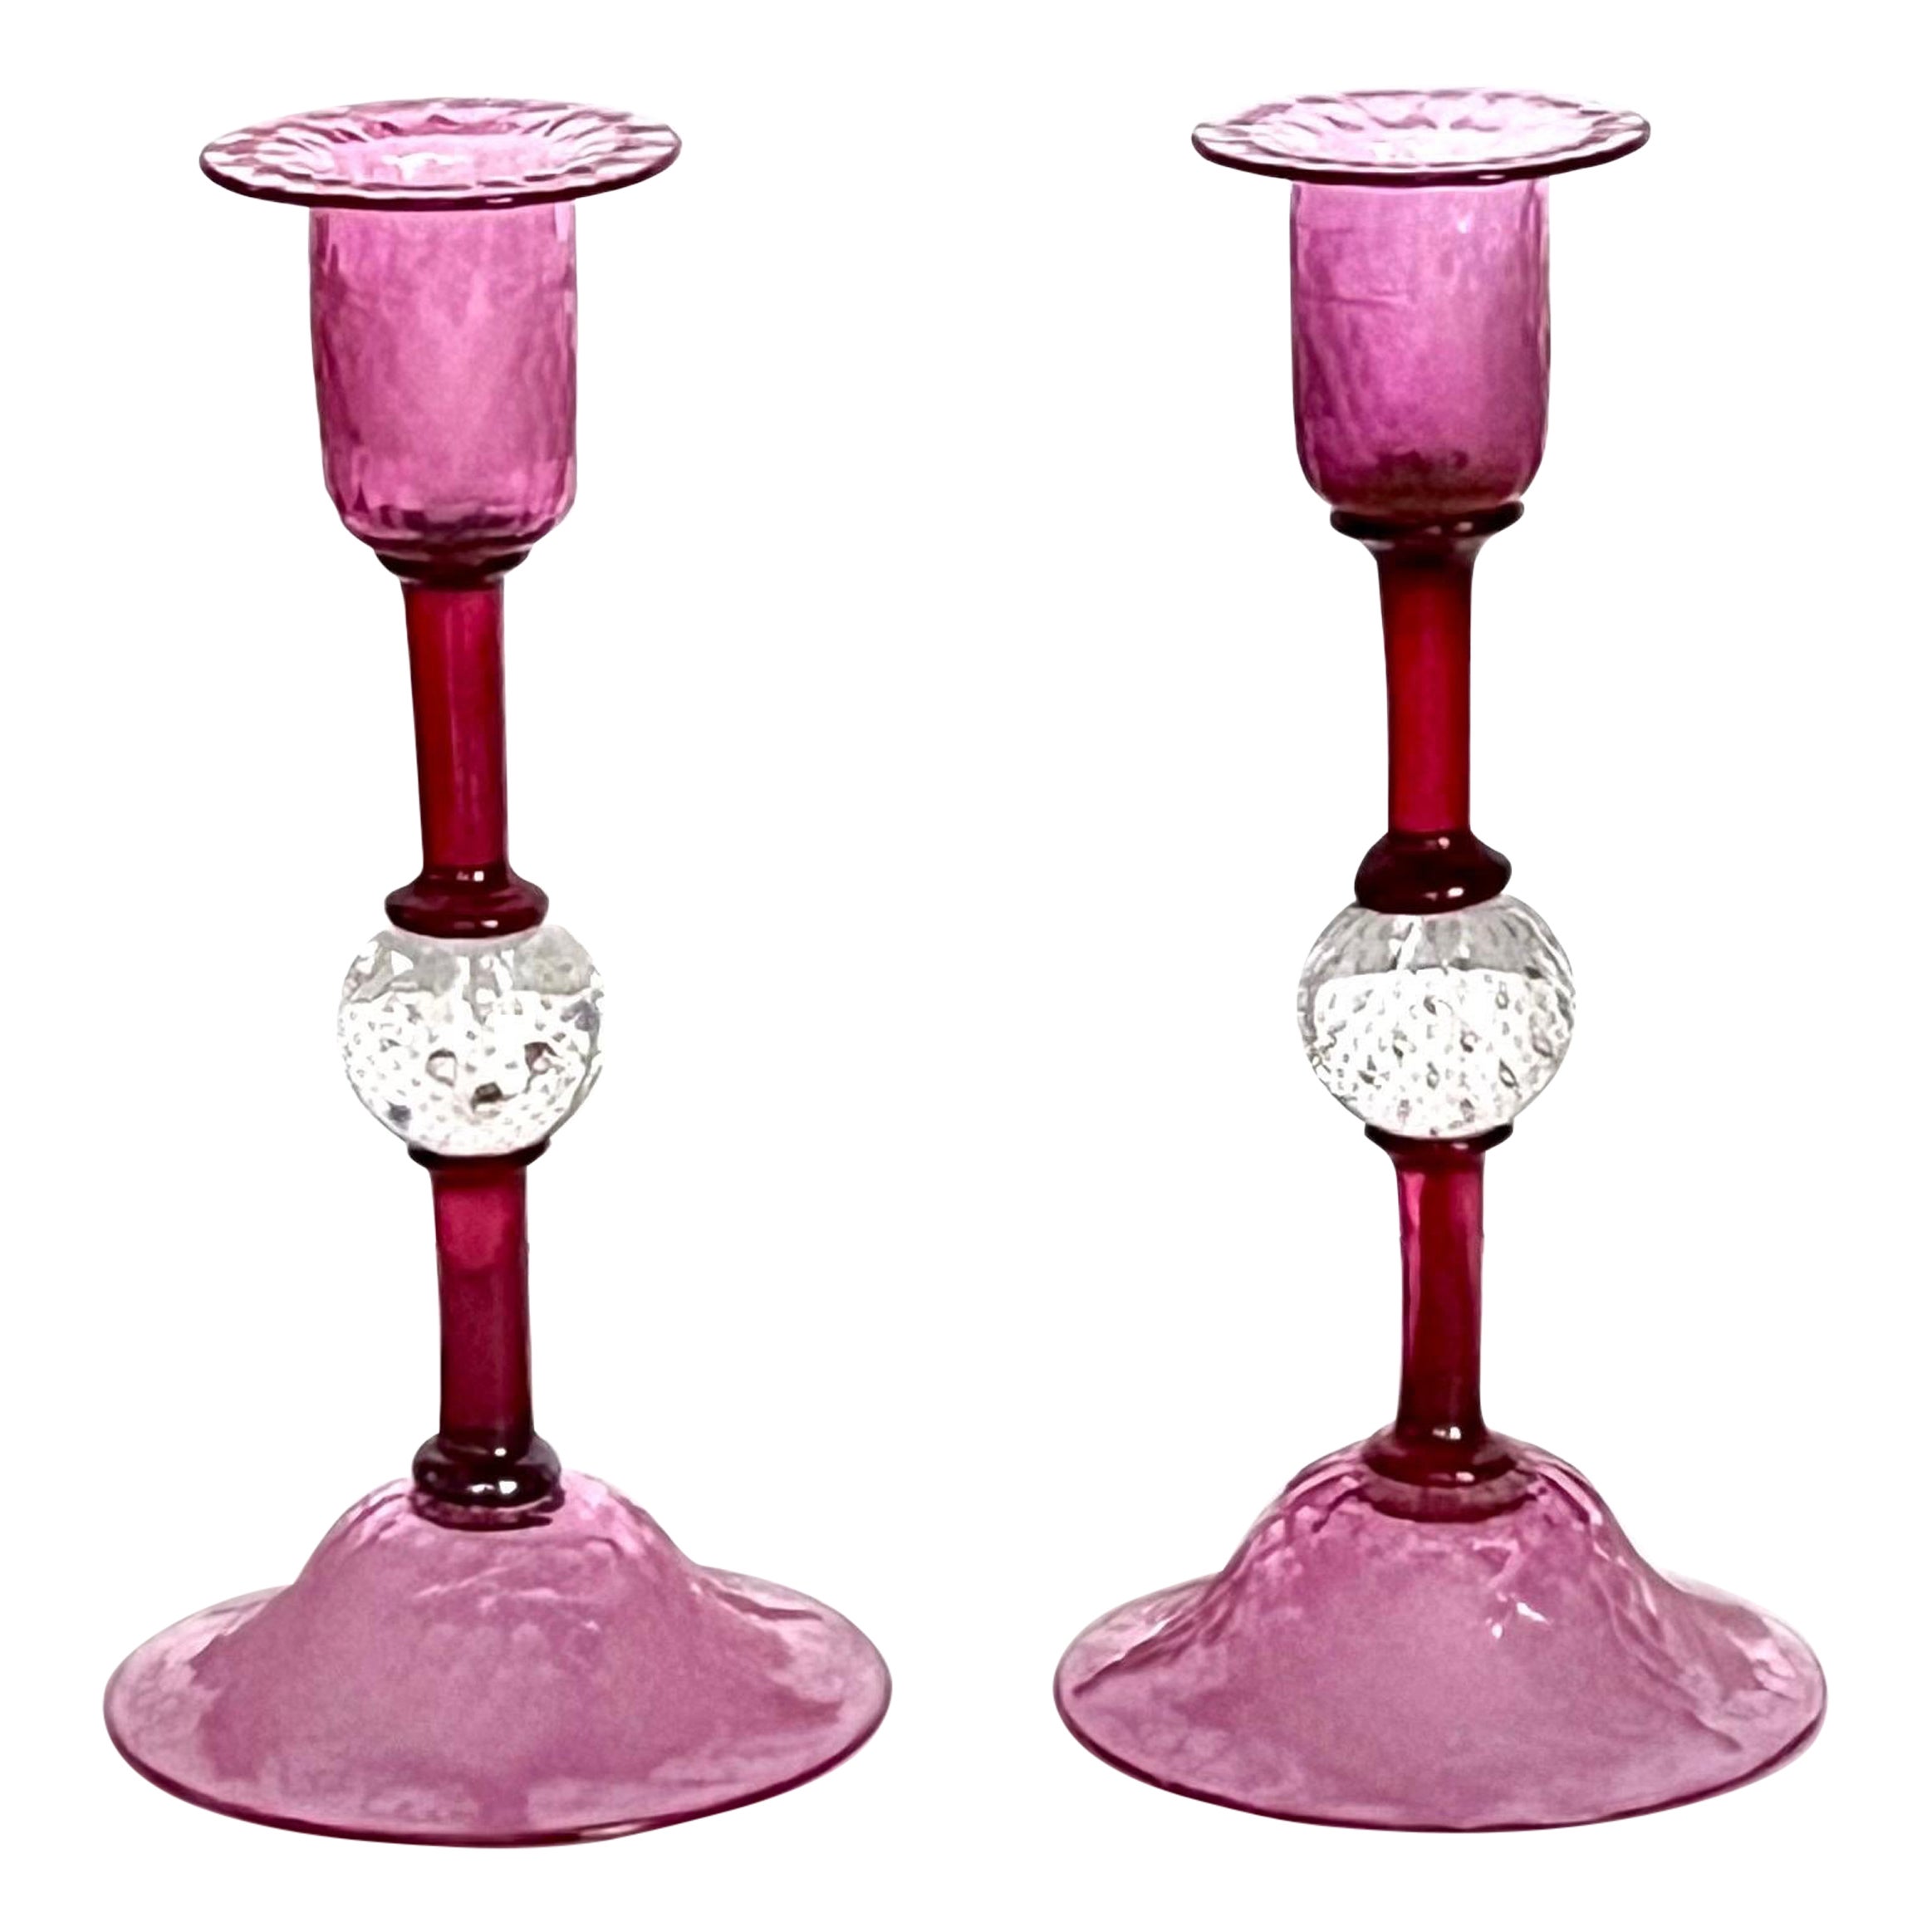 Pairpoint Engraved Cranberry Crystal Candlesticks, Controlled Bubble, C. 1930